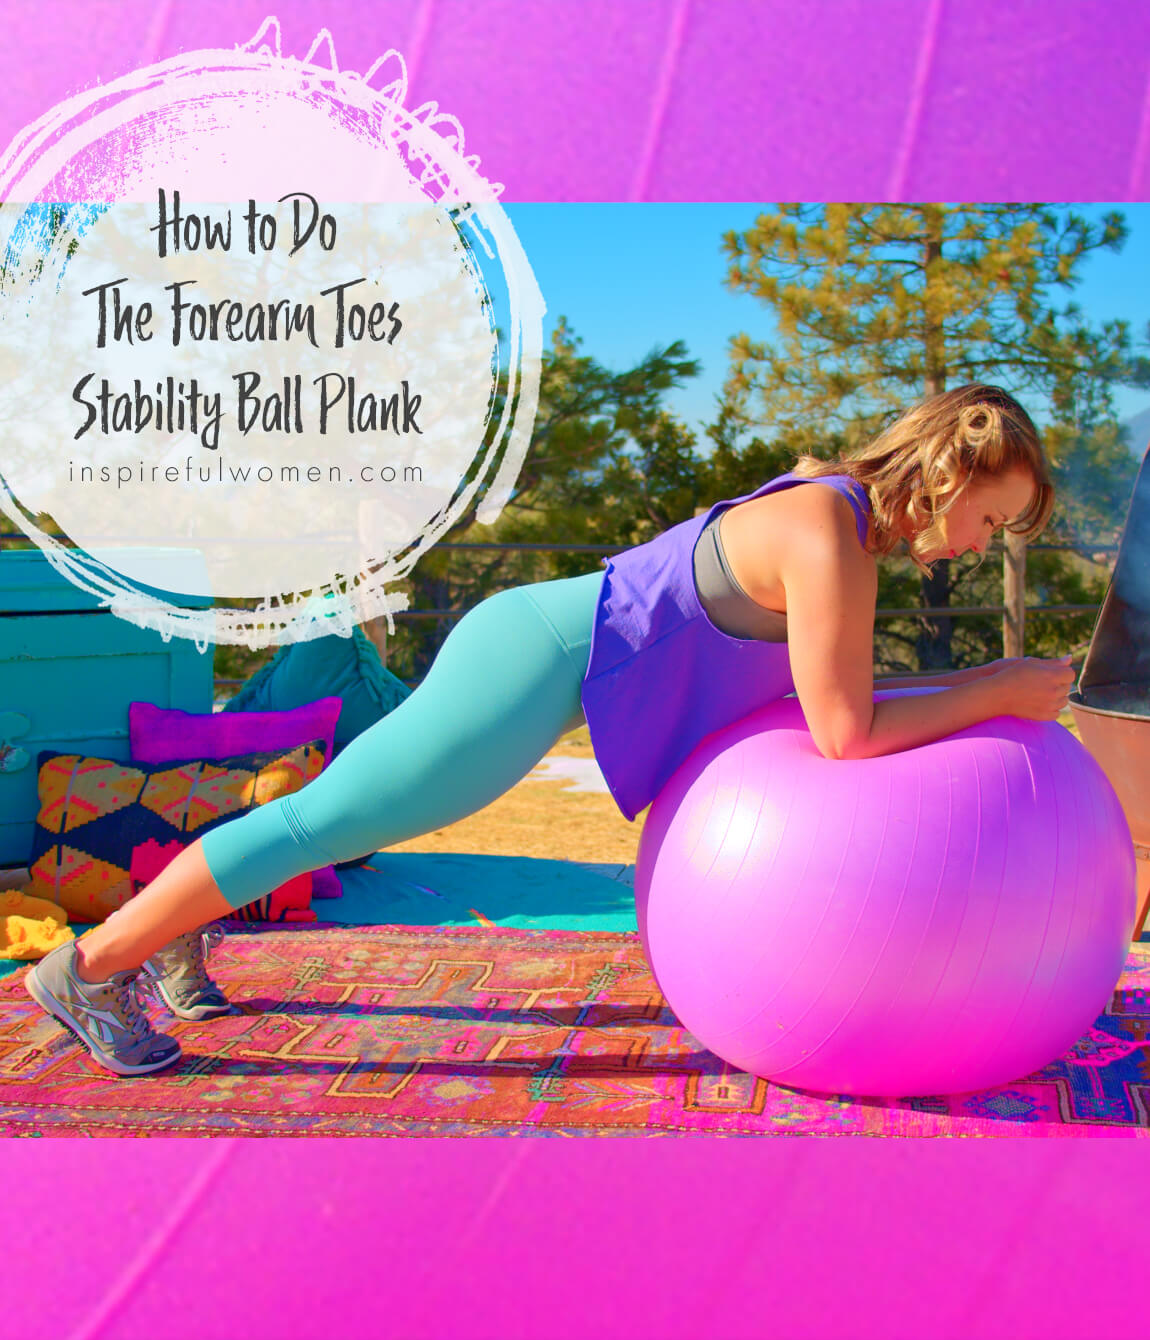 how-to-toes-forearm-stability-ball-plank-neutral-spine-core-exercise-proper-form